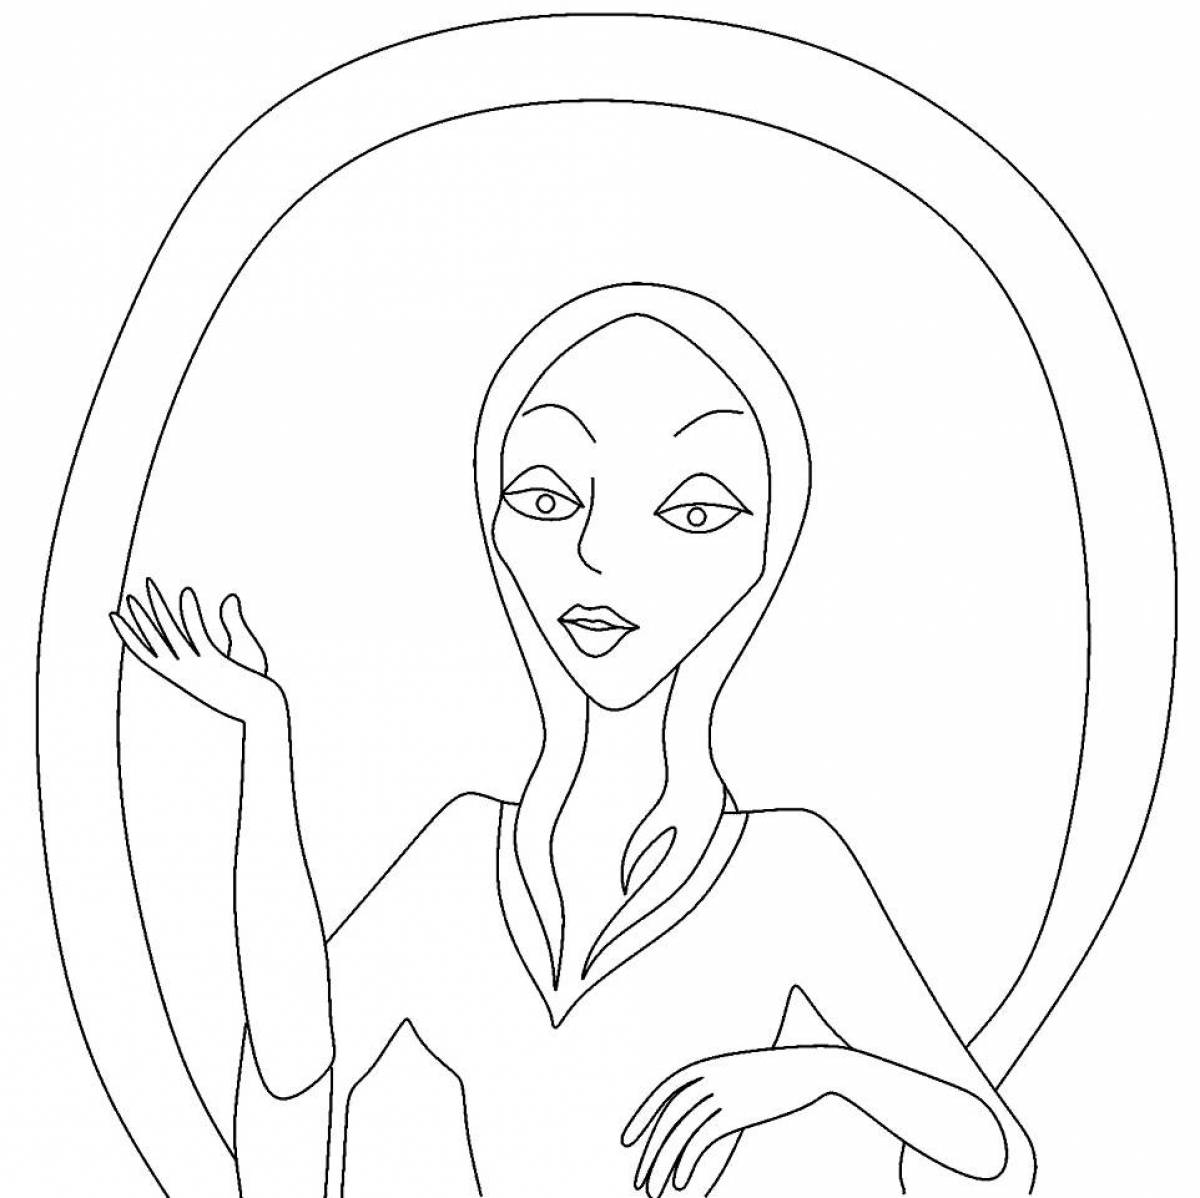 Funny addams family coloring book